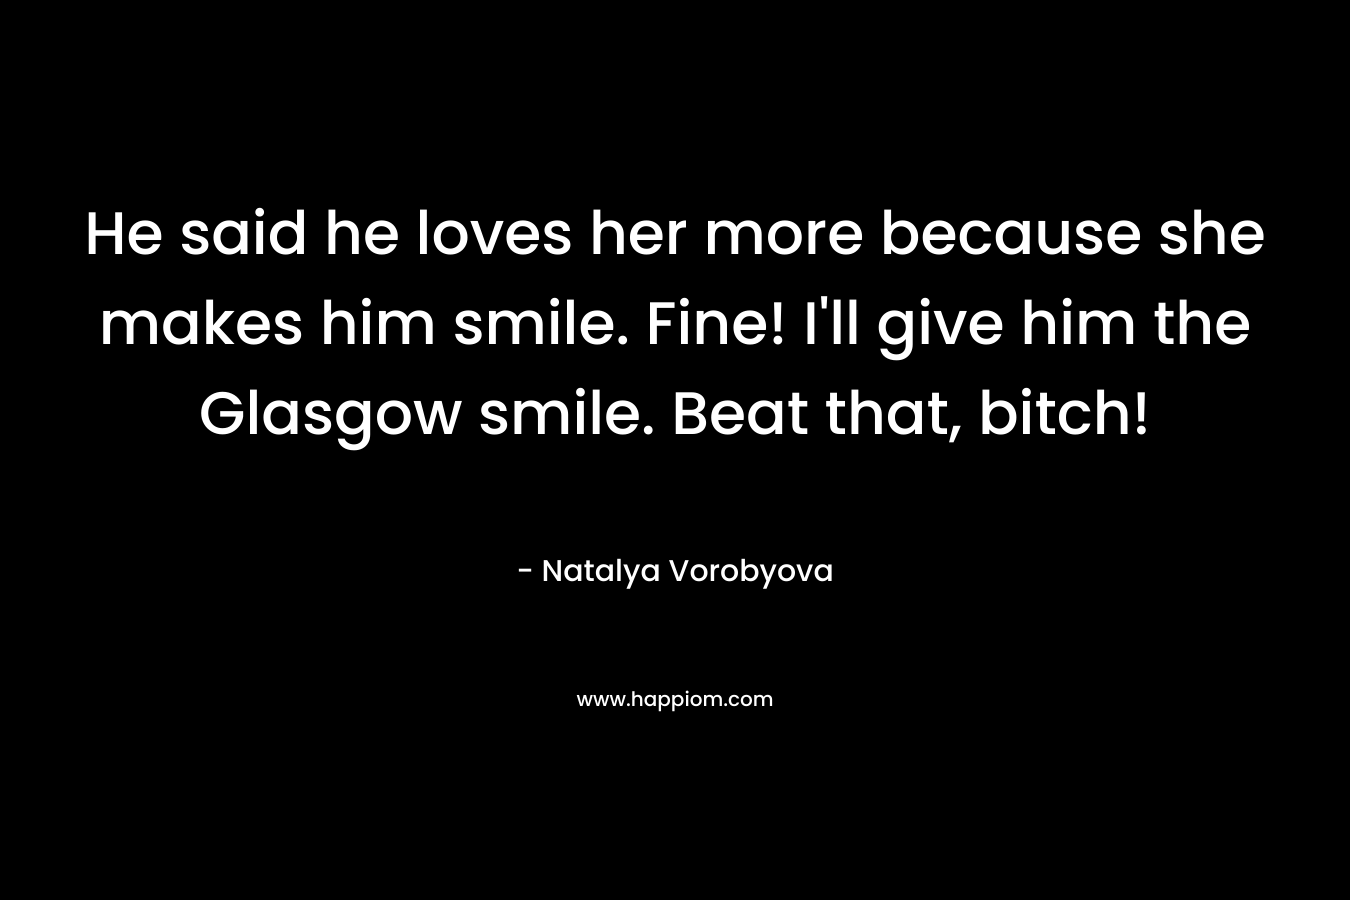 He said he loves her more because she makes him smile. Fine! I’ll give him the Glasgow smile. Beat that, bitch! – Natalya Vorobyova